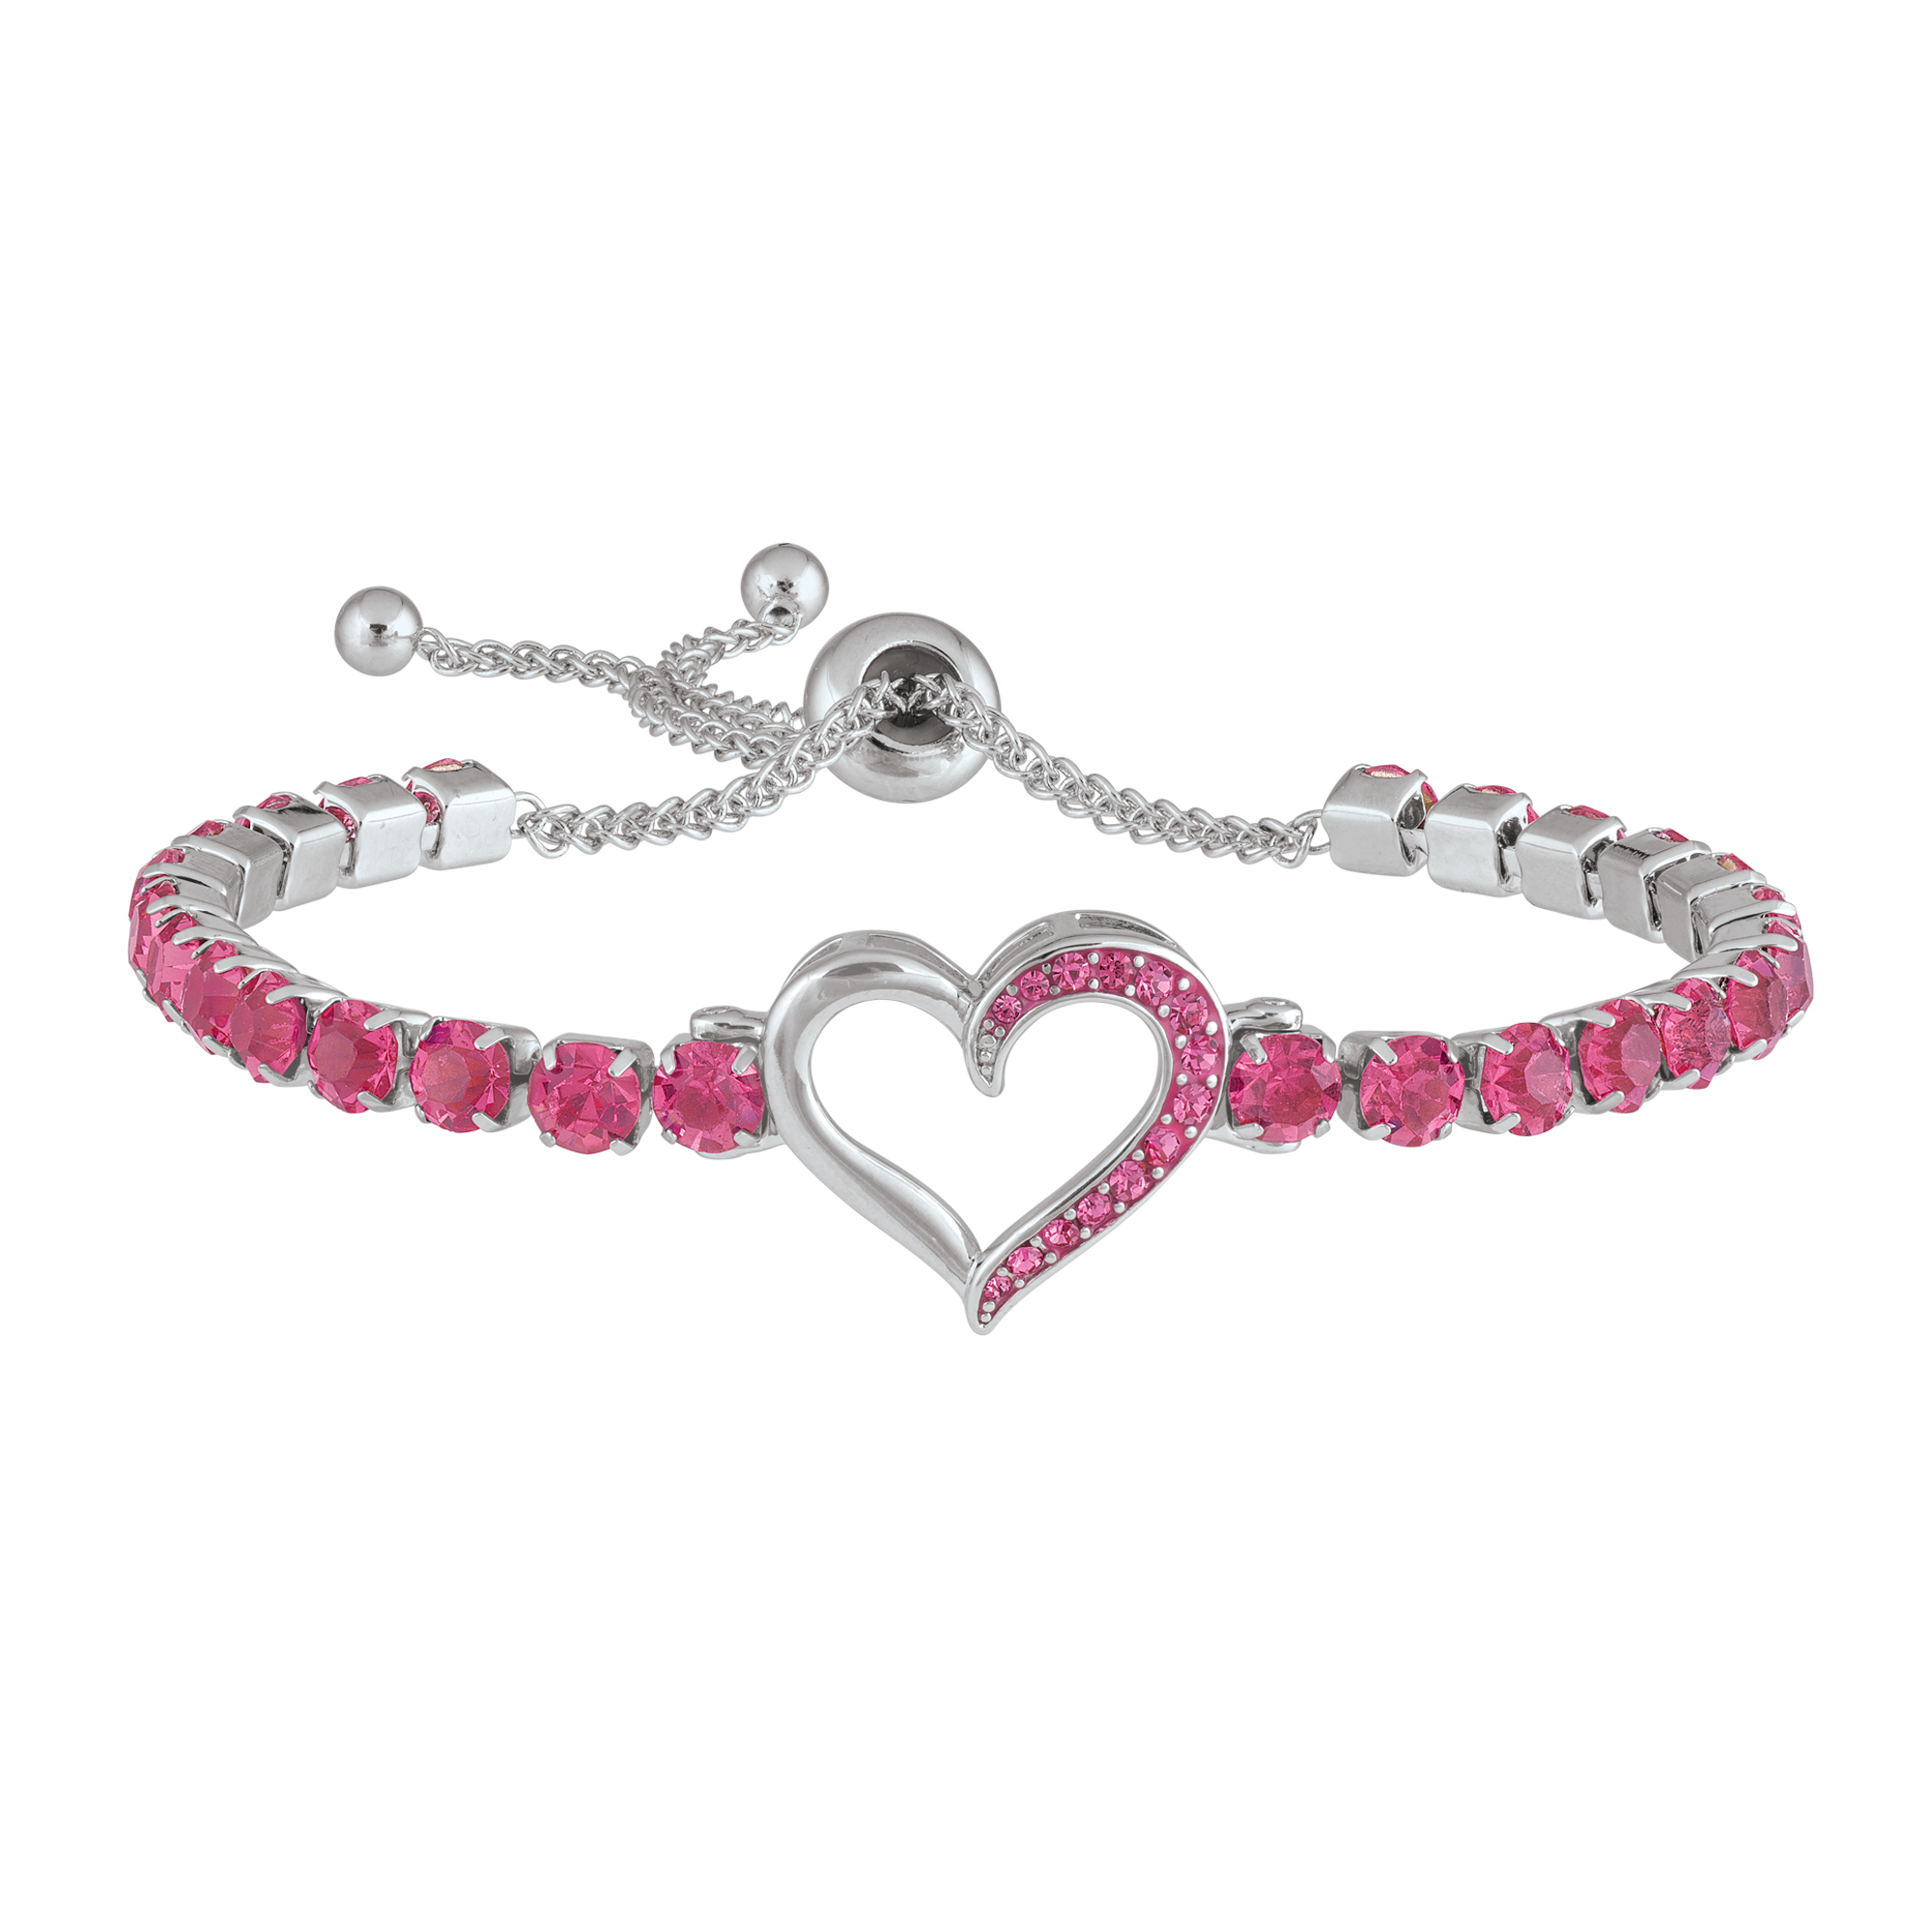 A Year of Sparkle Tennis Bracelet Collection 6933 0017 a main